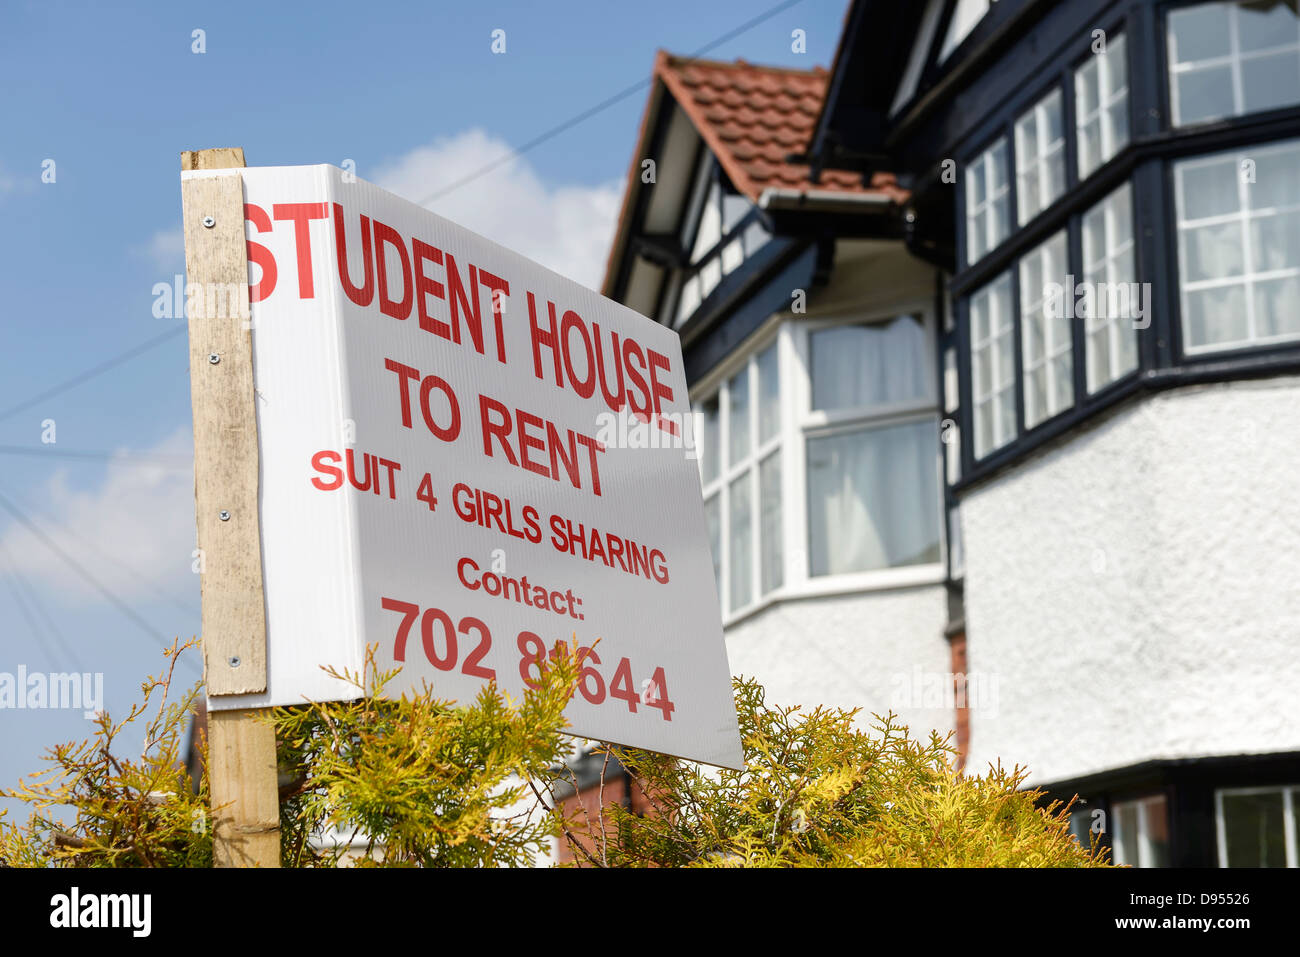 Student house to rent sign Stock Photo